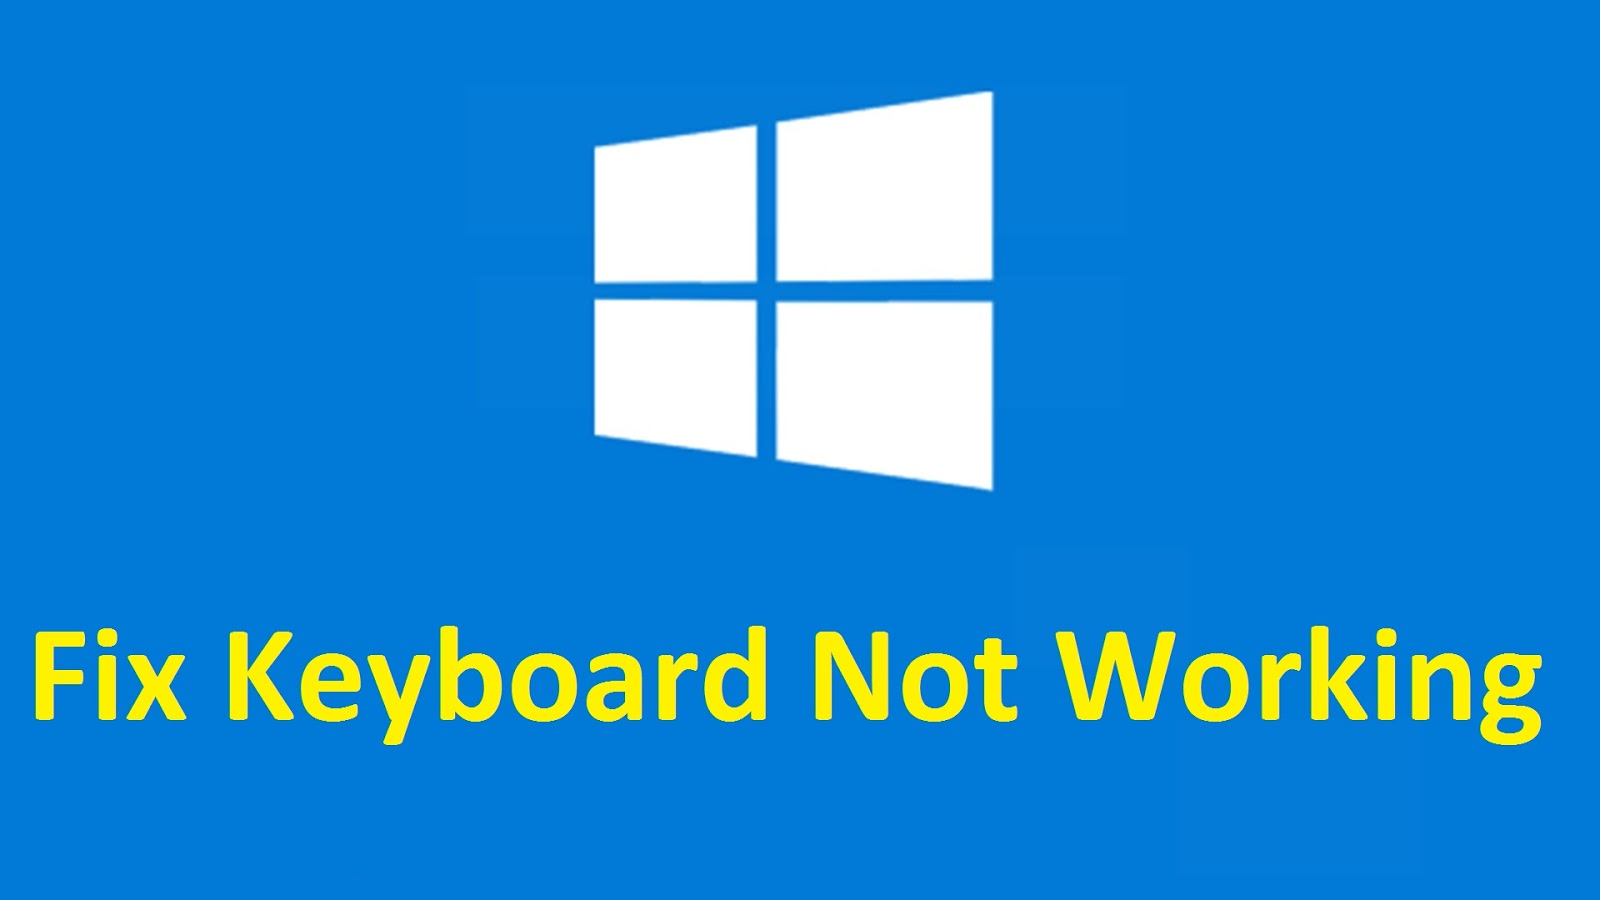 Fix keyboard not working properly windows 10/8!! « ITN Today